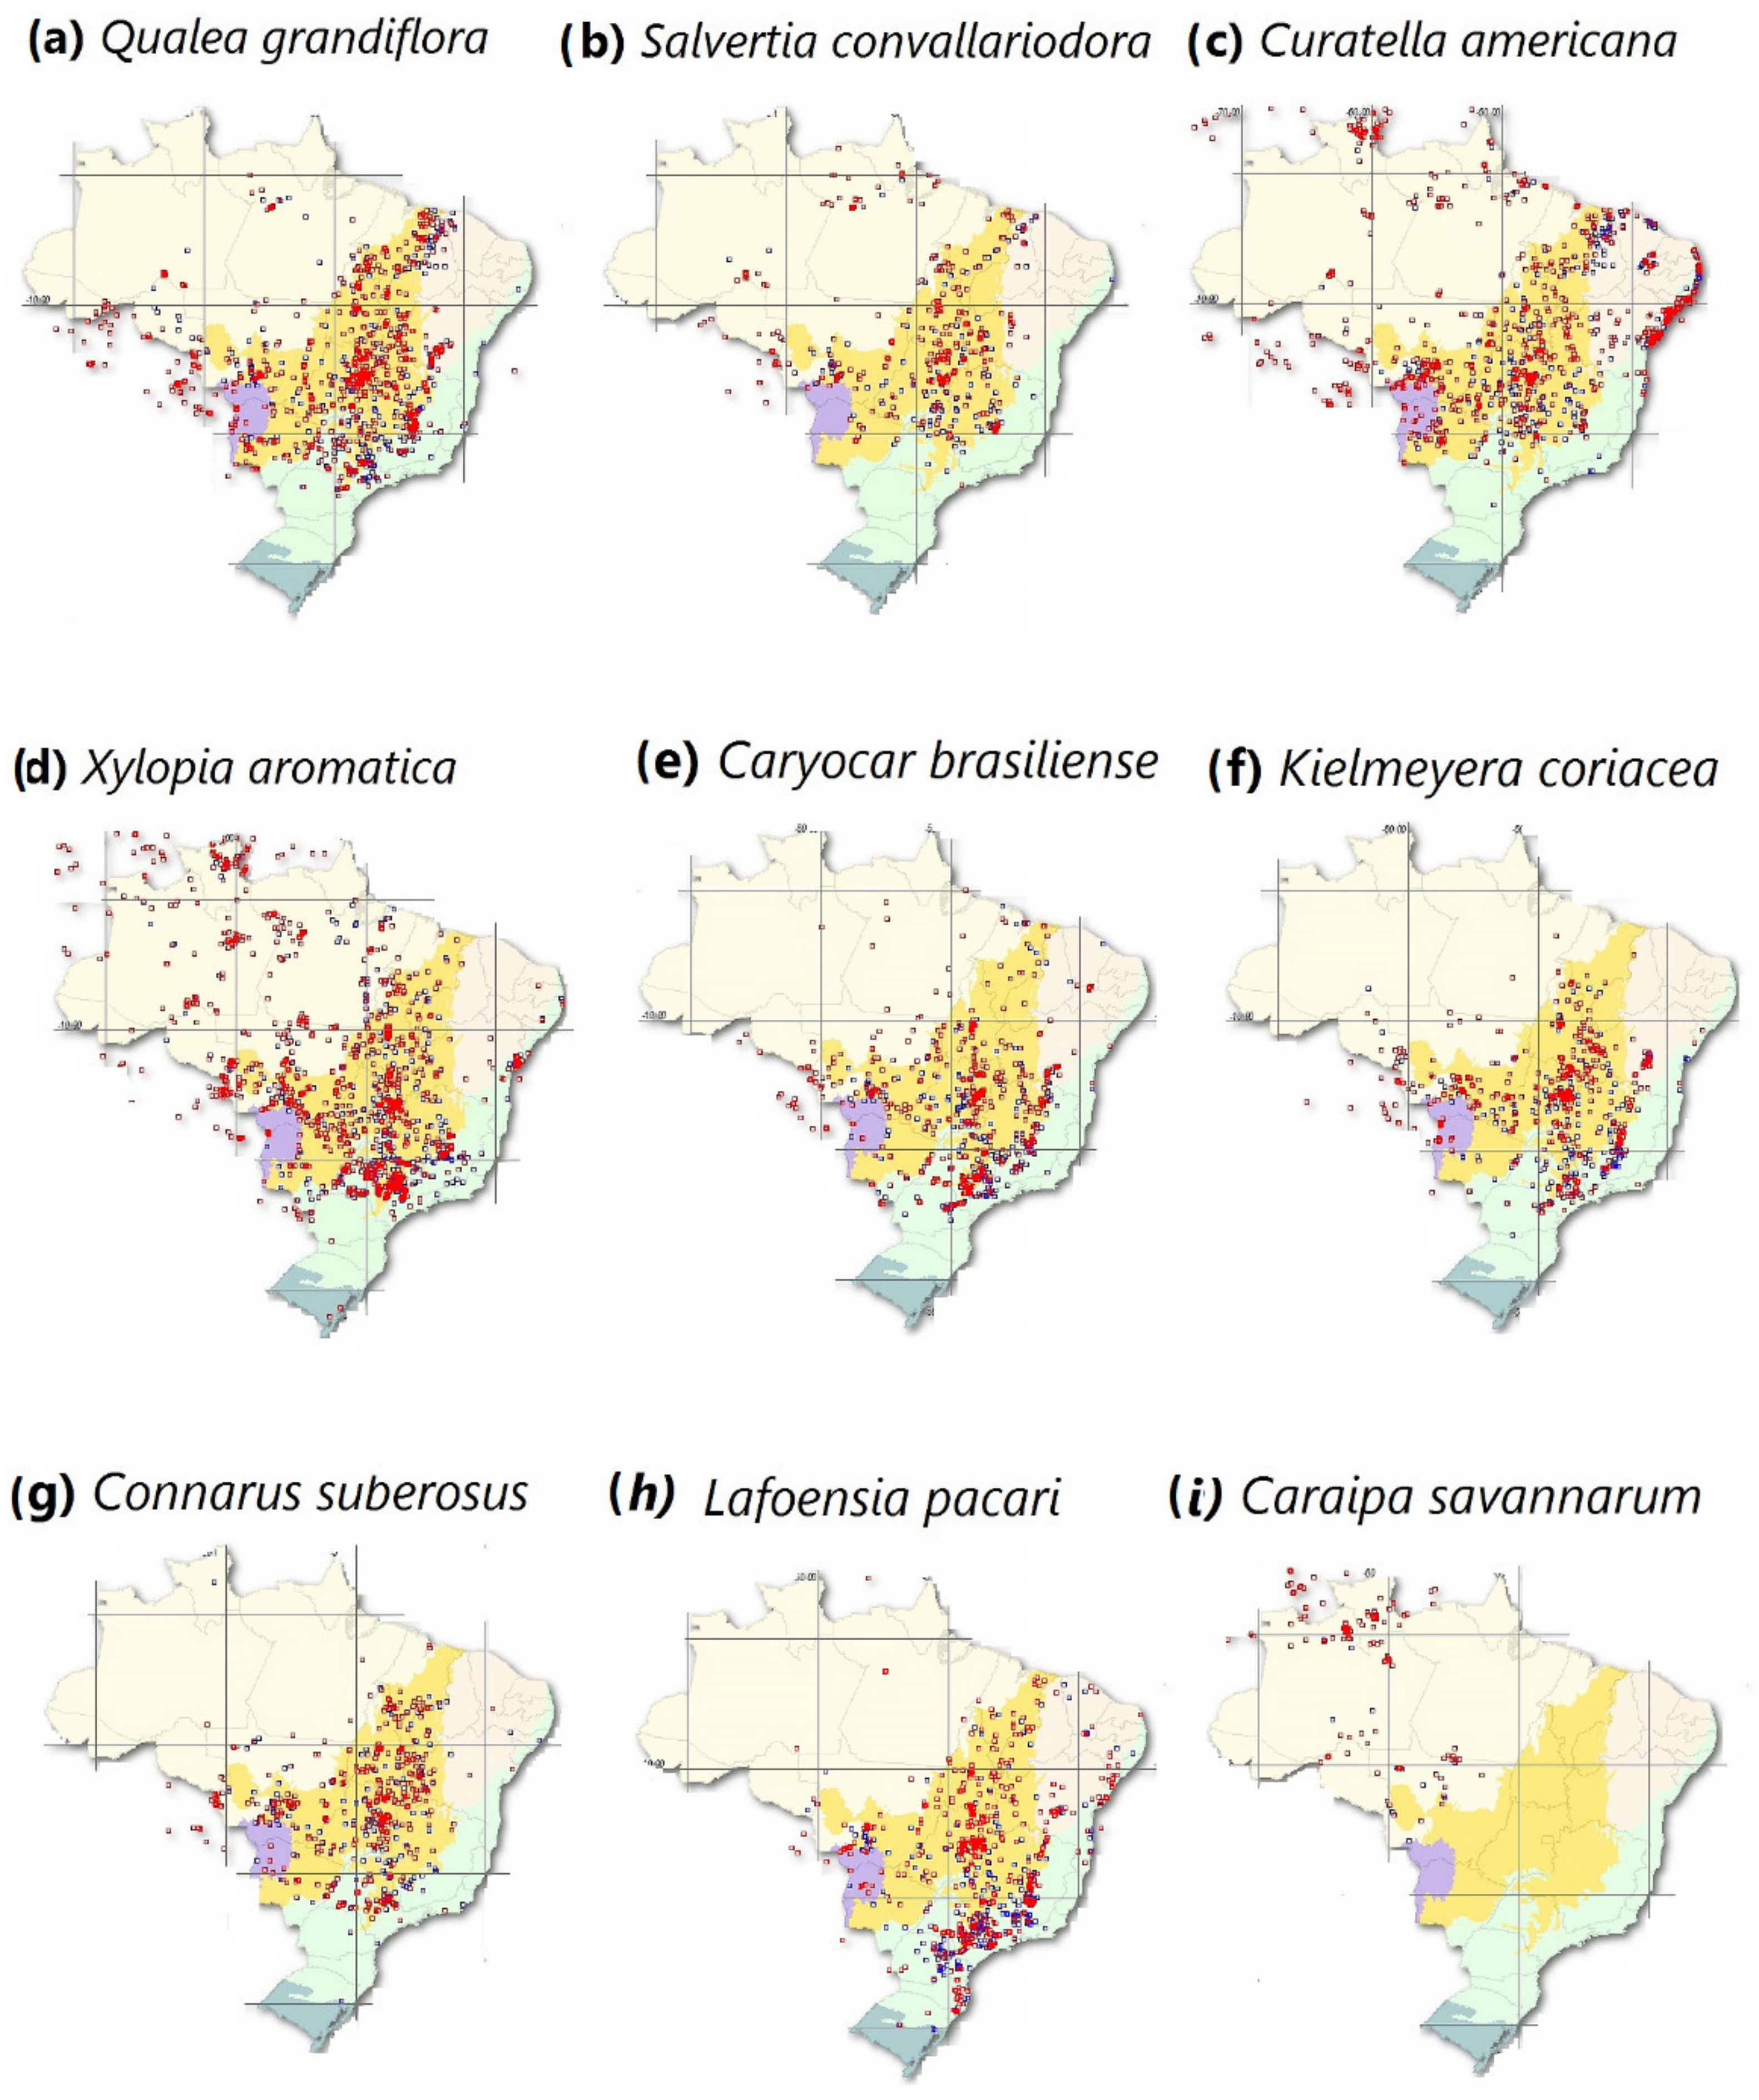 Deforestation in Brazil could significantly increase local surface  temperatures